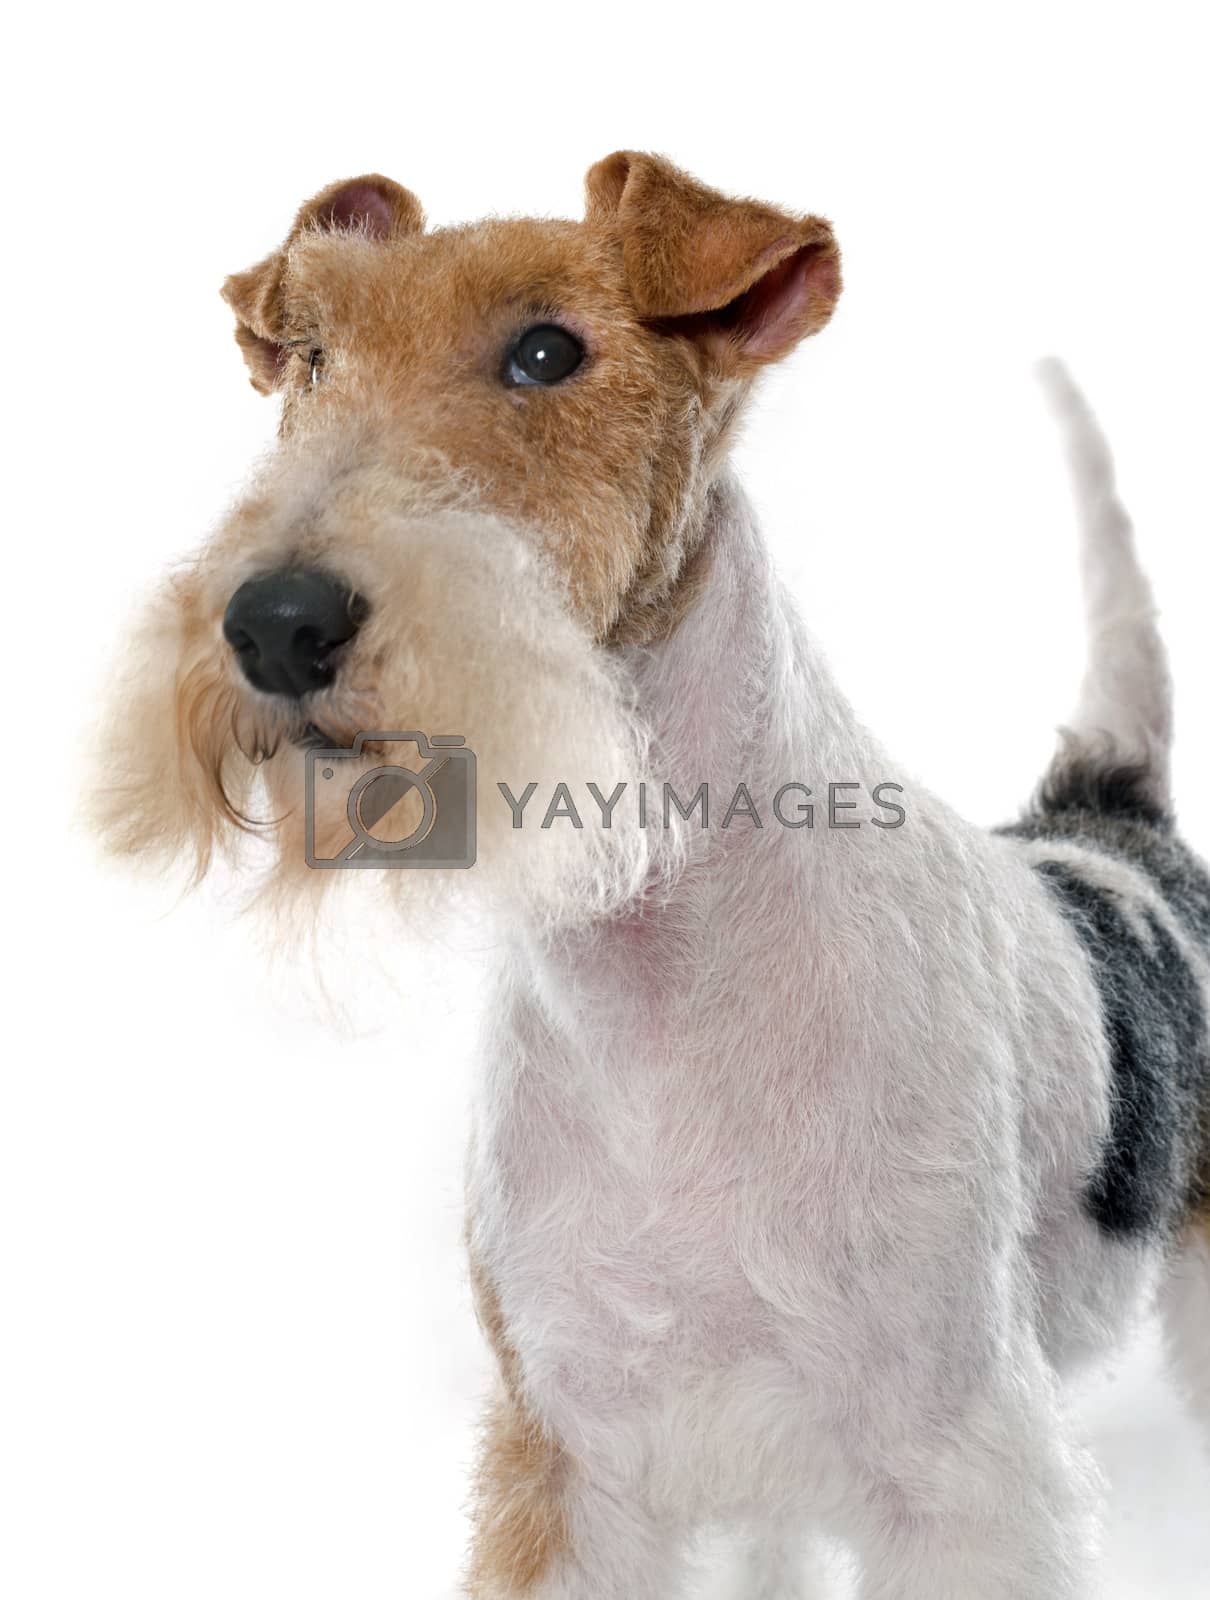 Royalty free image of purebred fox terrier by cynoclub